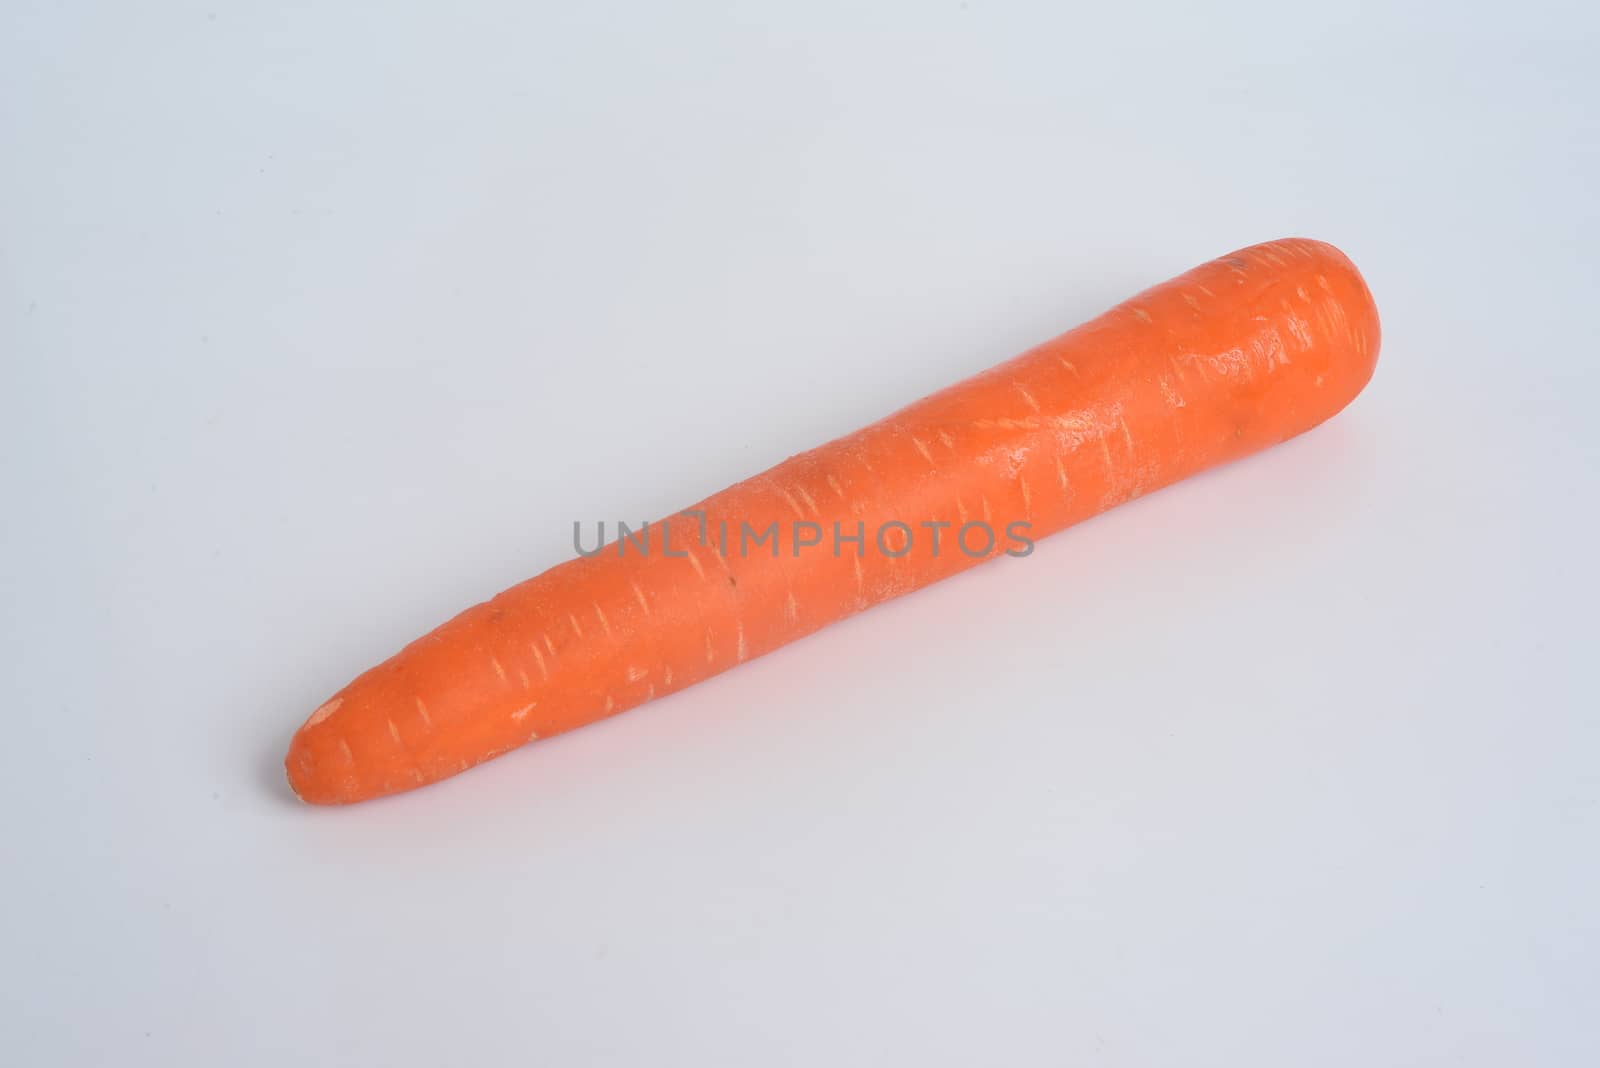 The carrot (Daucus carota subsp. sativus) is a root vegetable, usually orange in colour. by ideation90